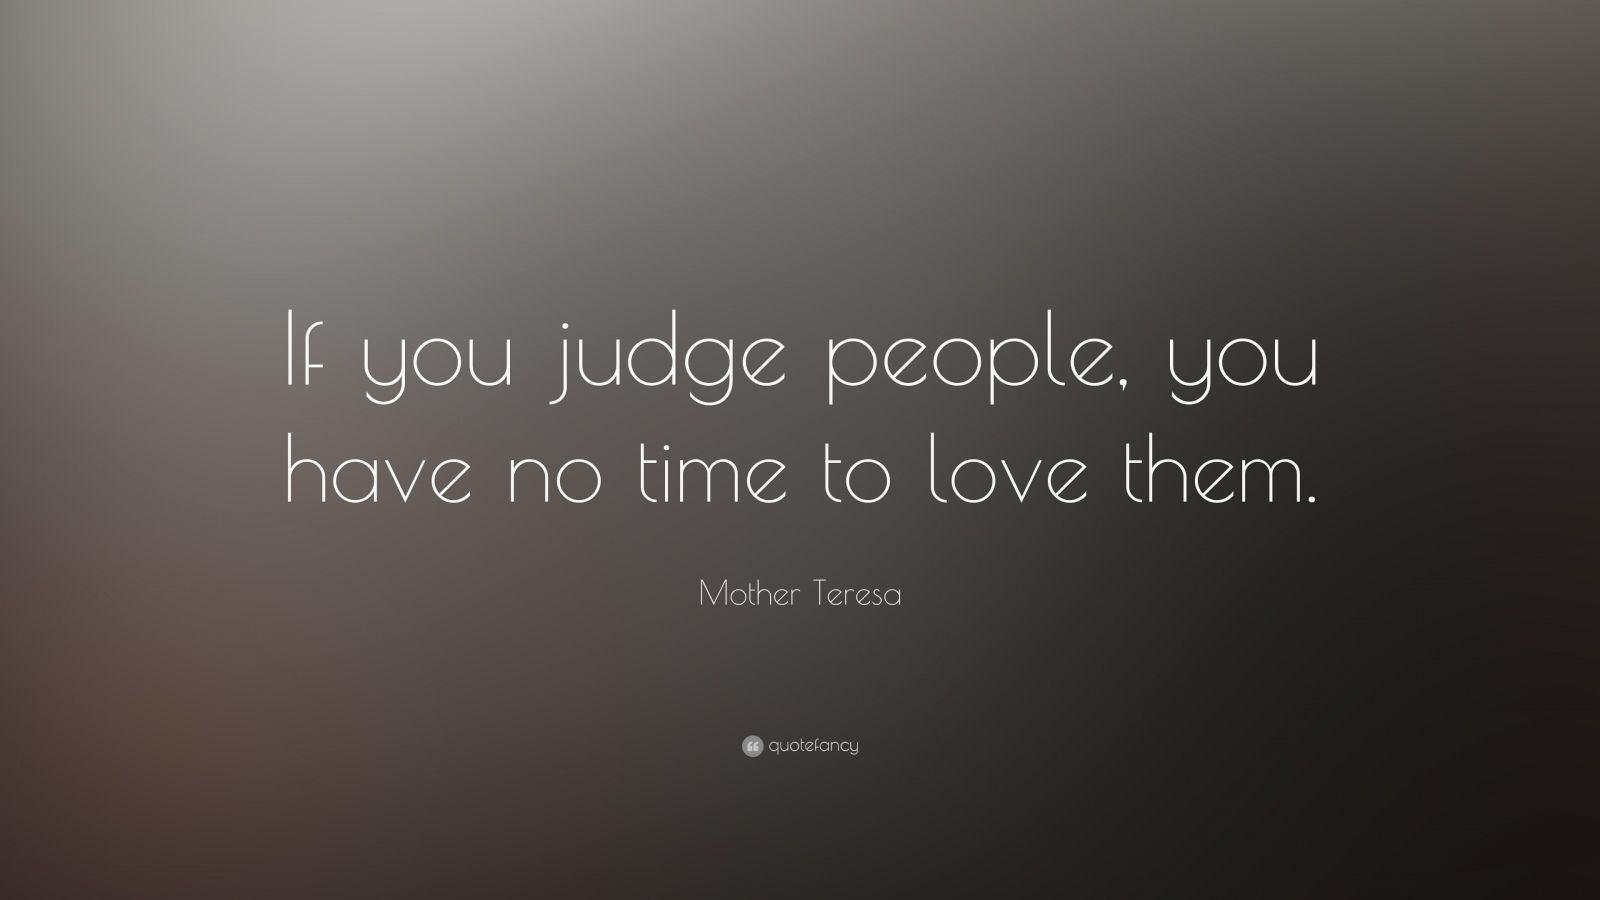 Mother Teresa Quote: "If you judge people, you have no time to love them." (22 wallpapers ...